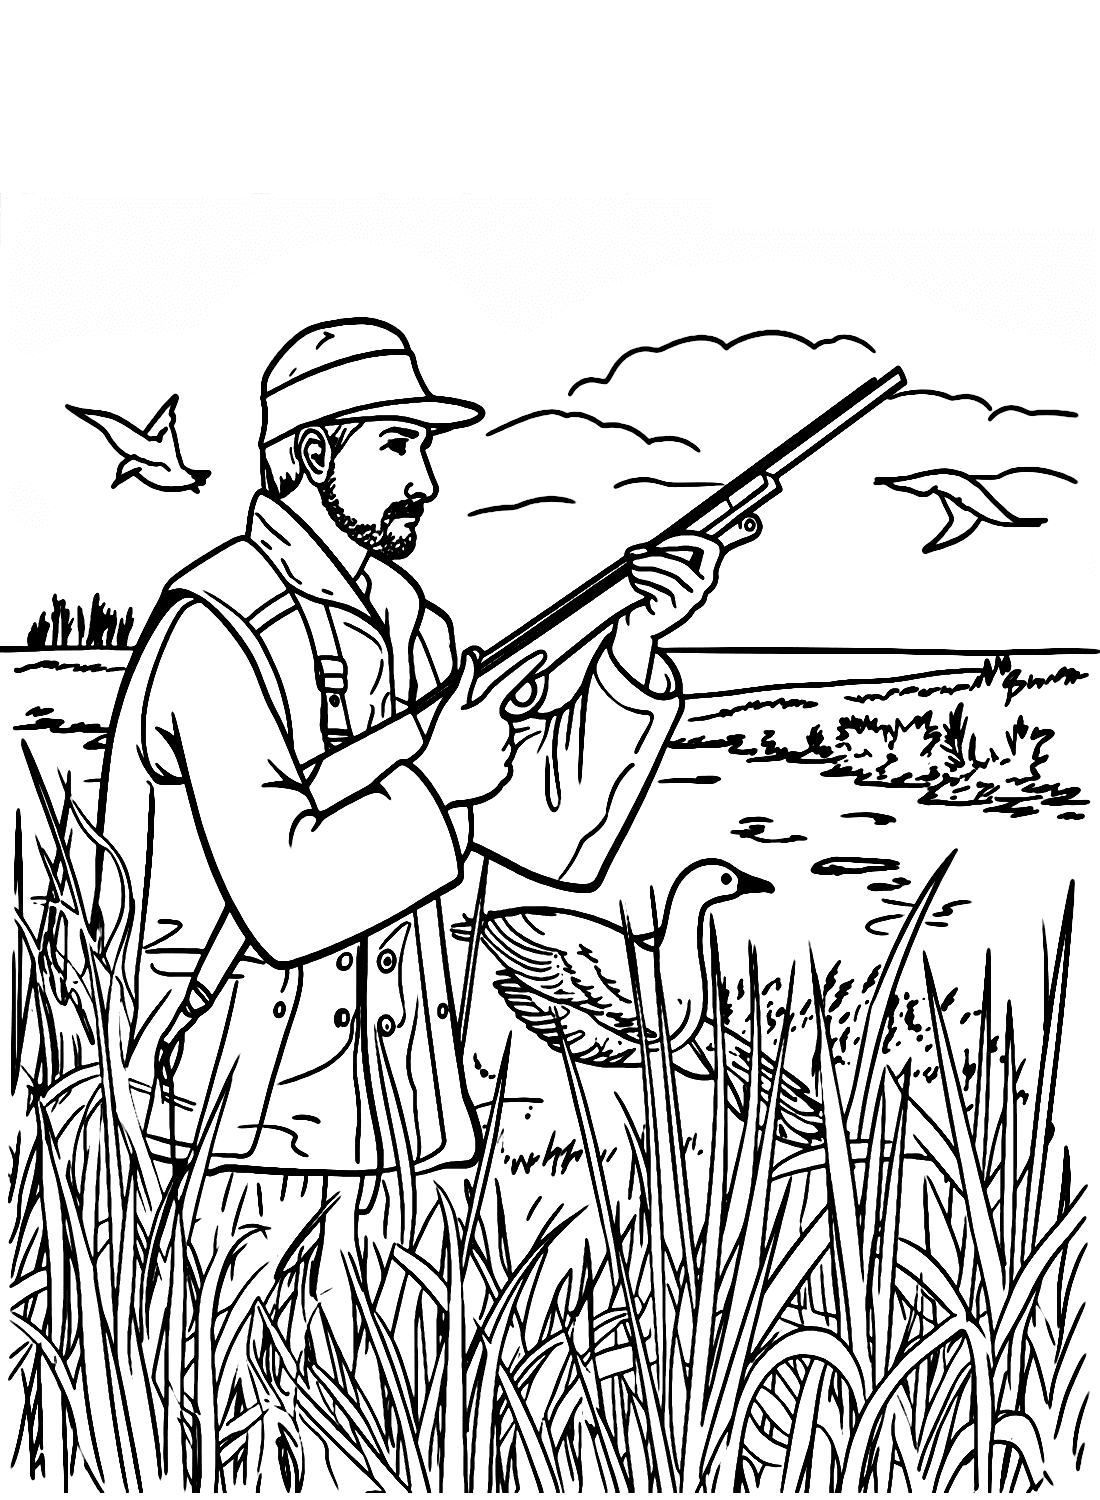 Man Hunting Ducks in the Field Coloring Page